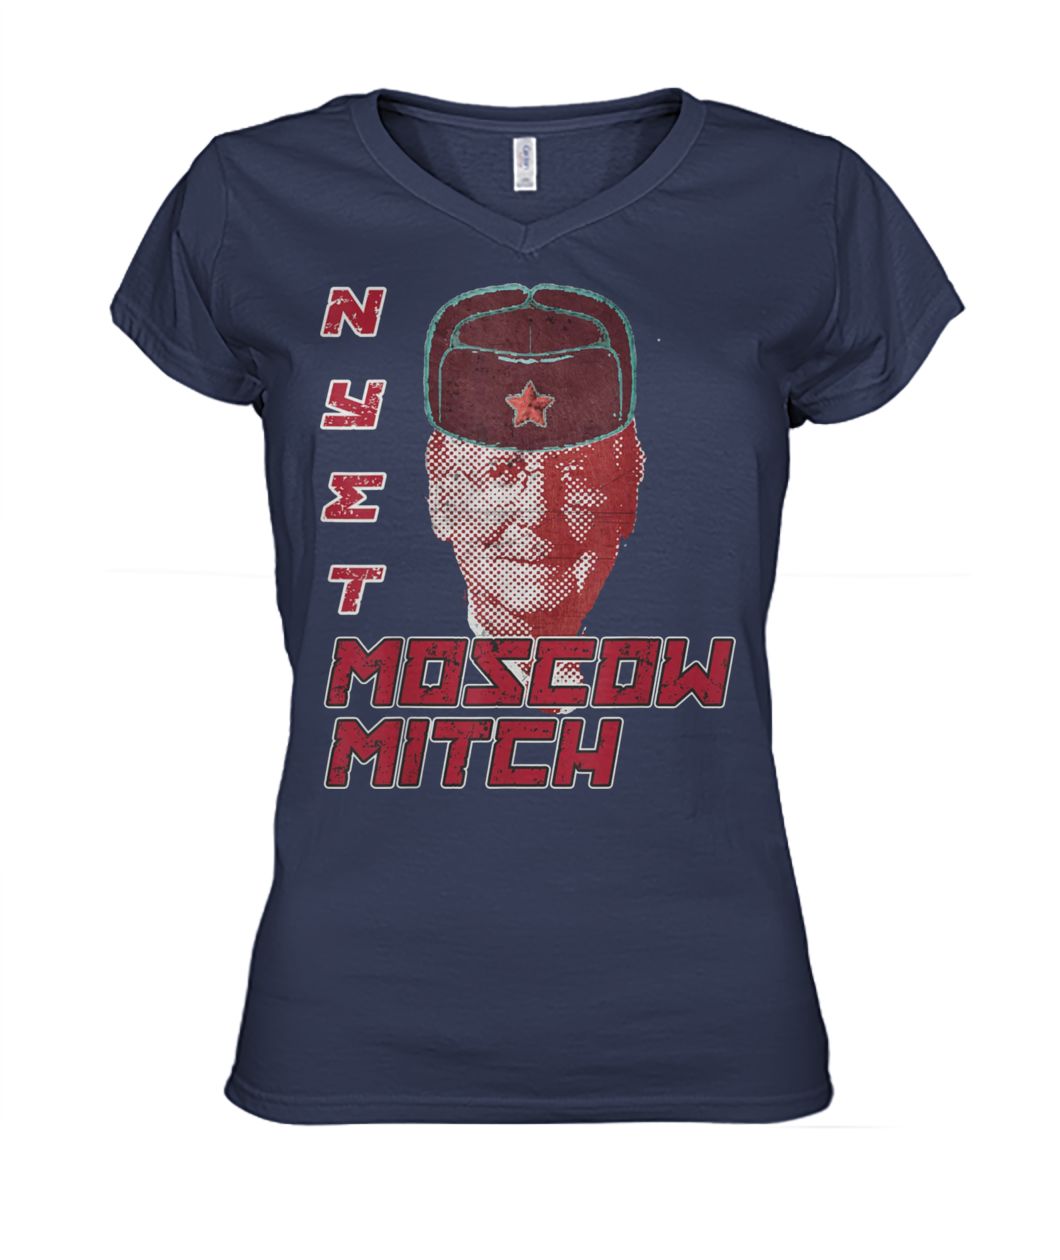 Moscow mitch mcconnell nyet women's v-neck